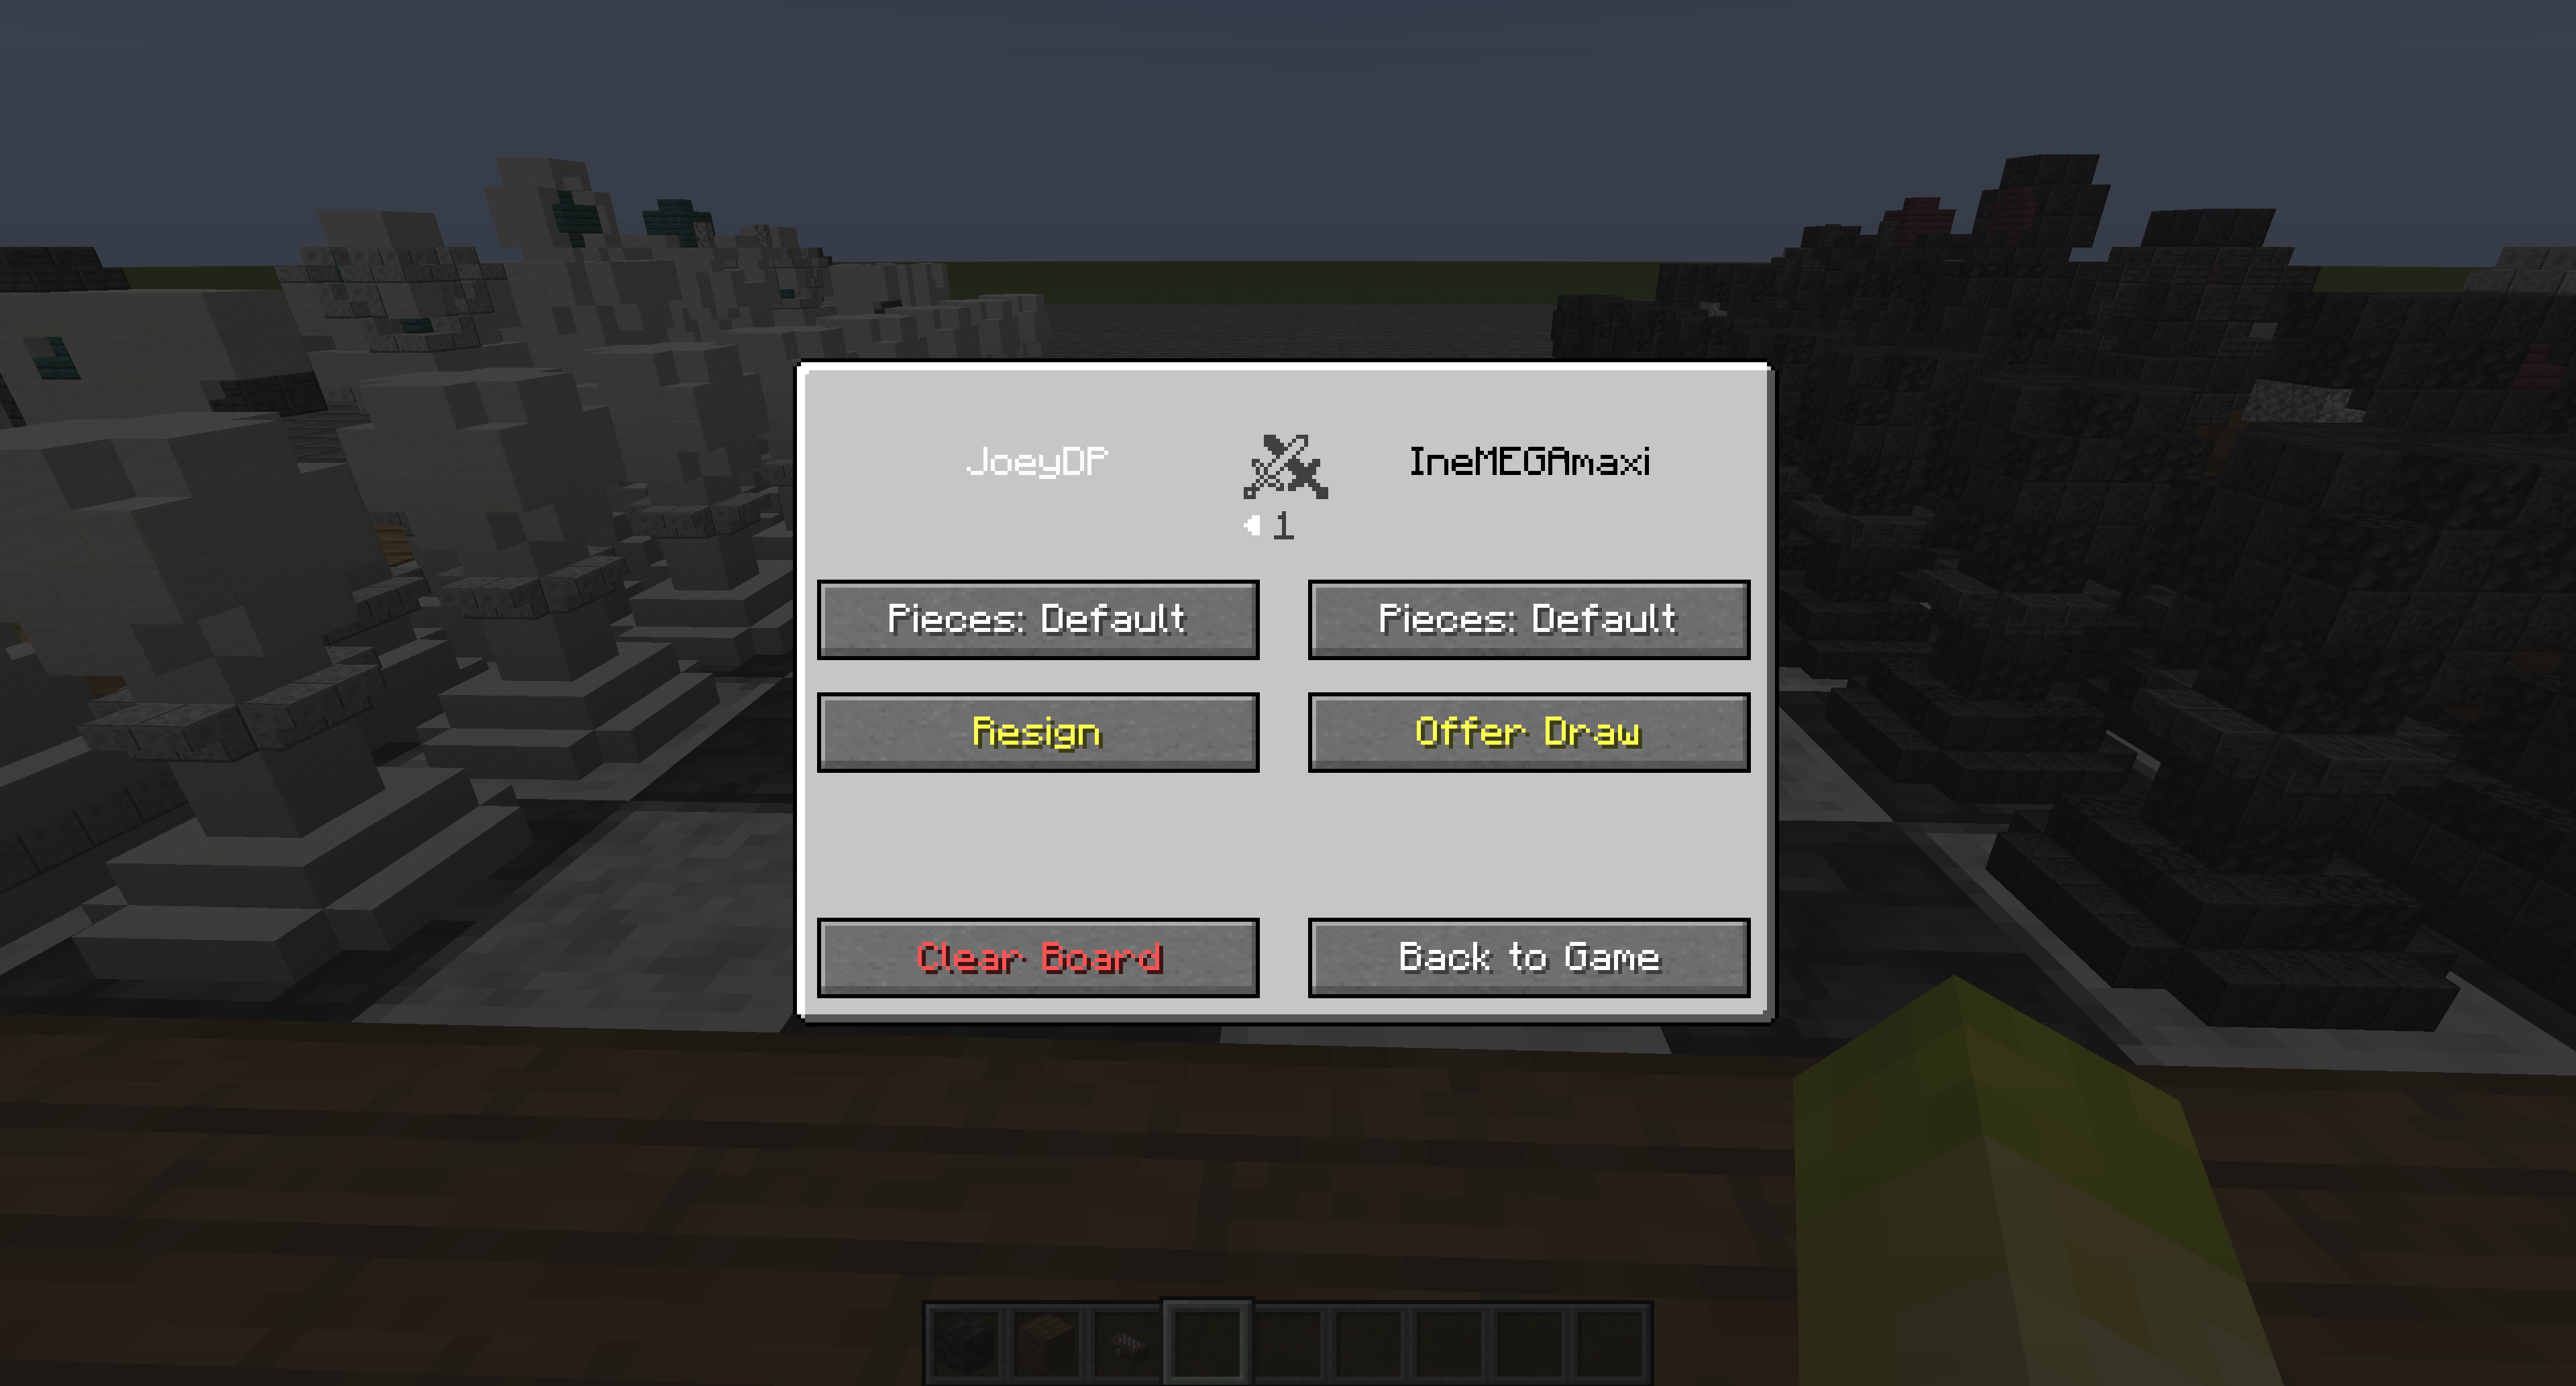 The in-game GUI